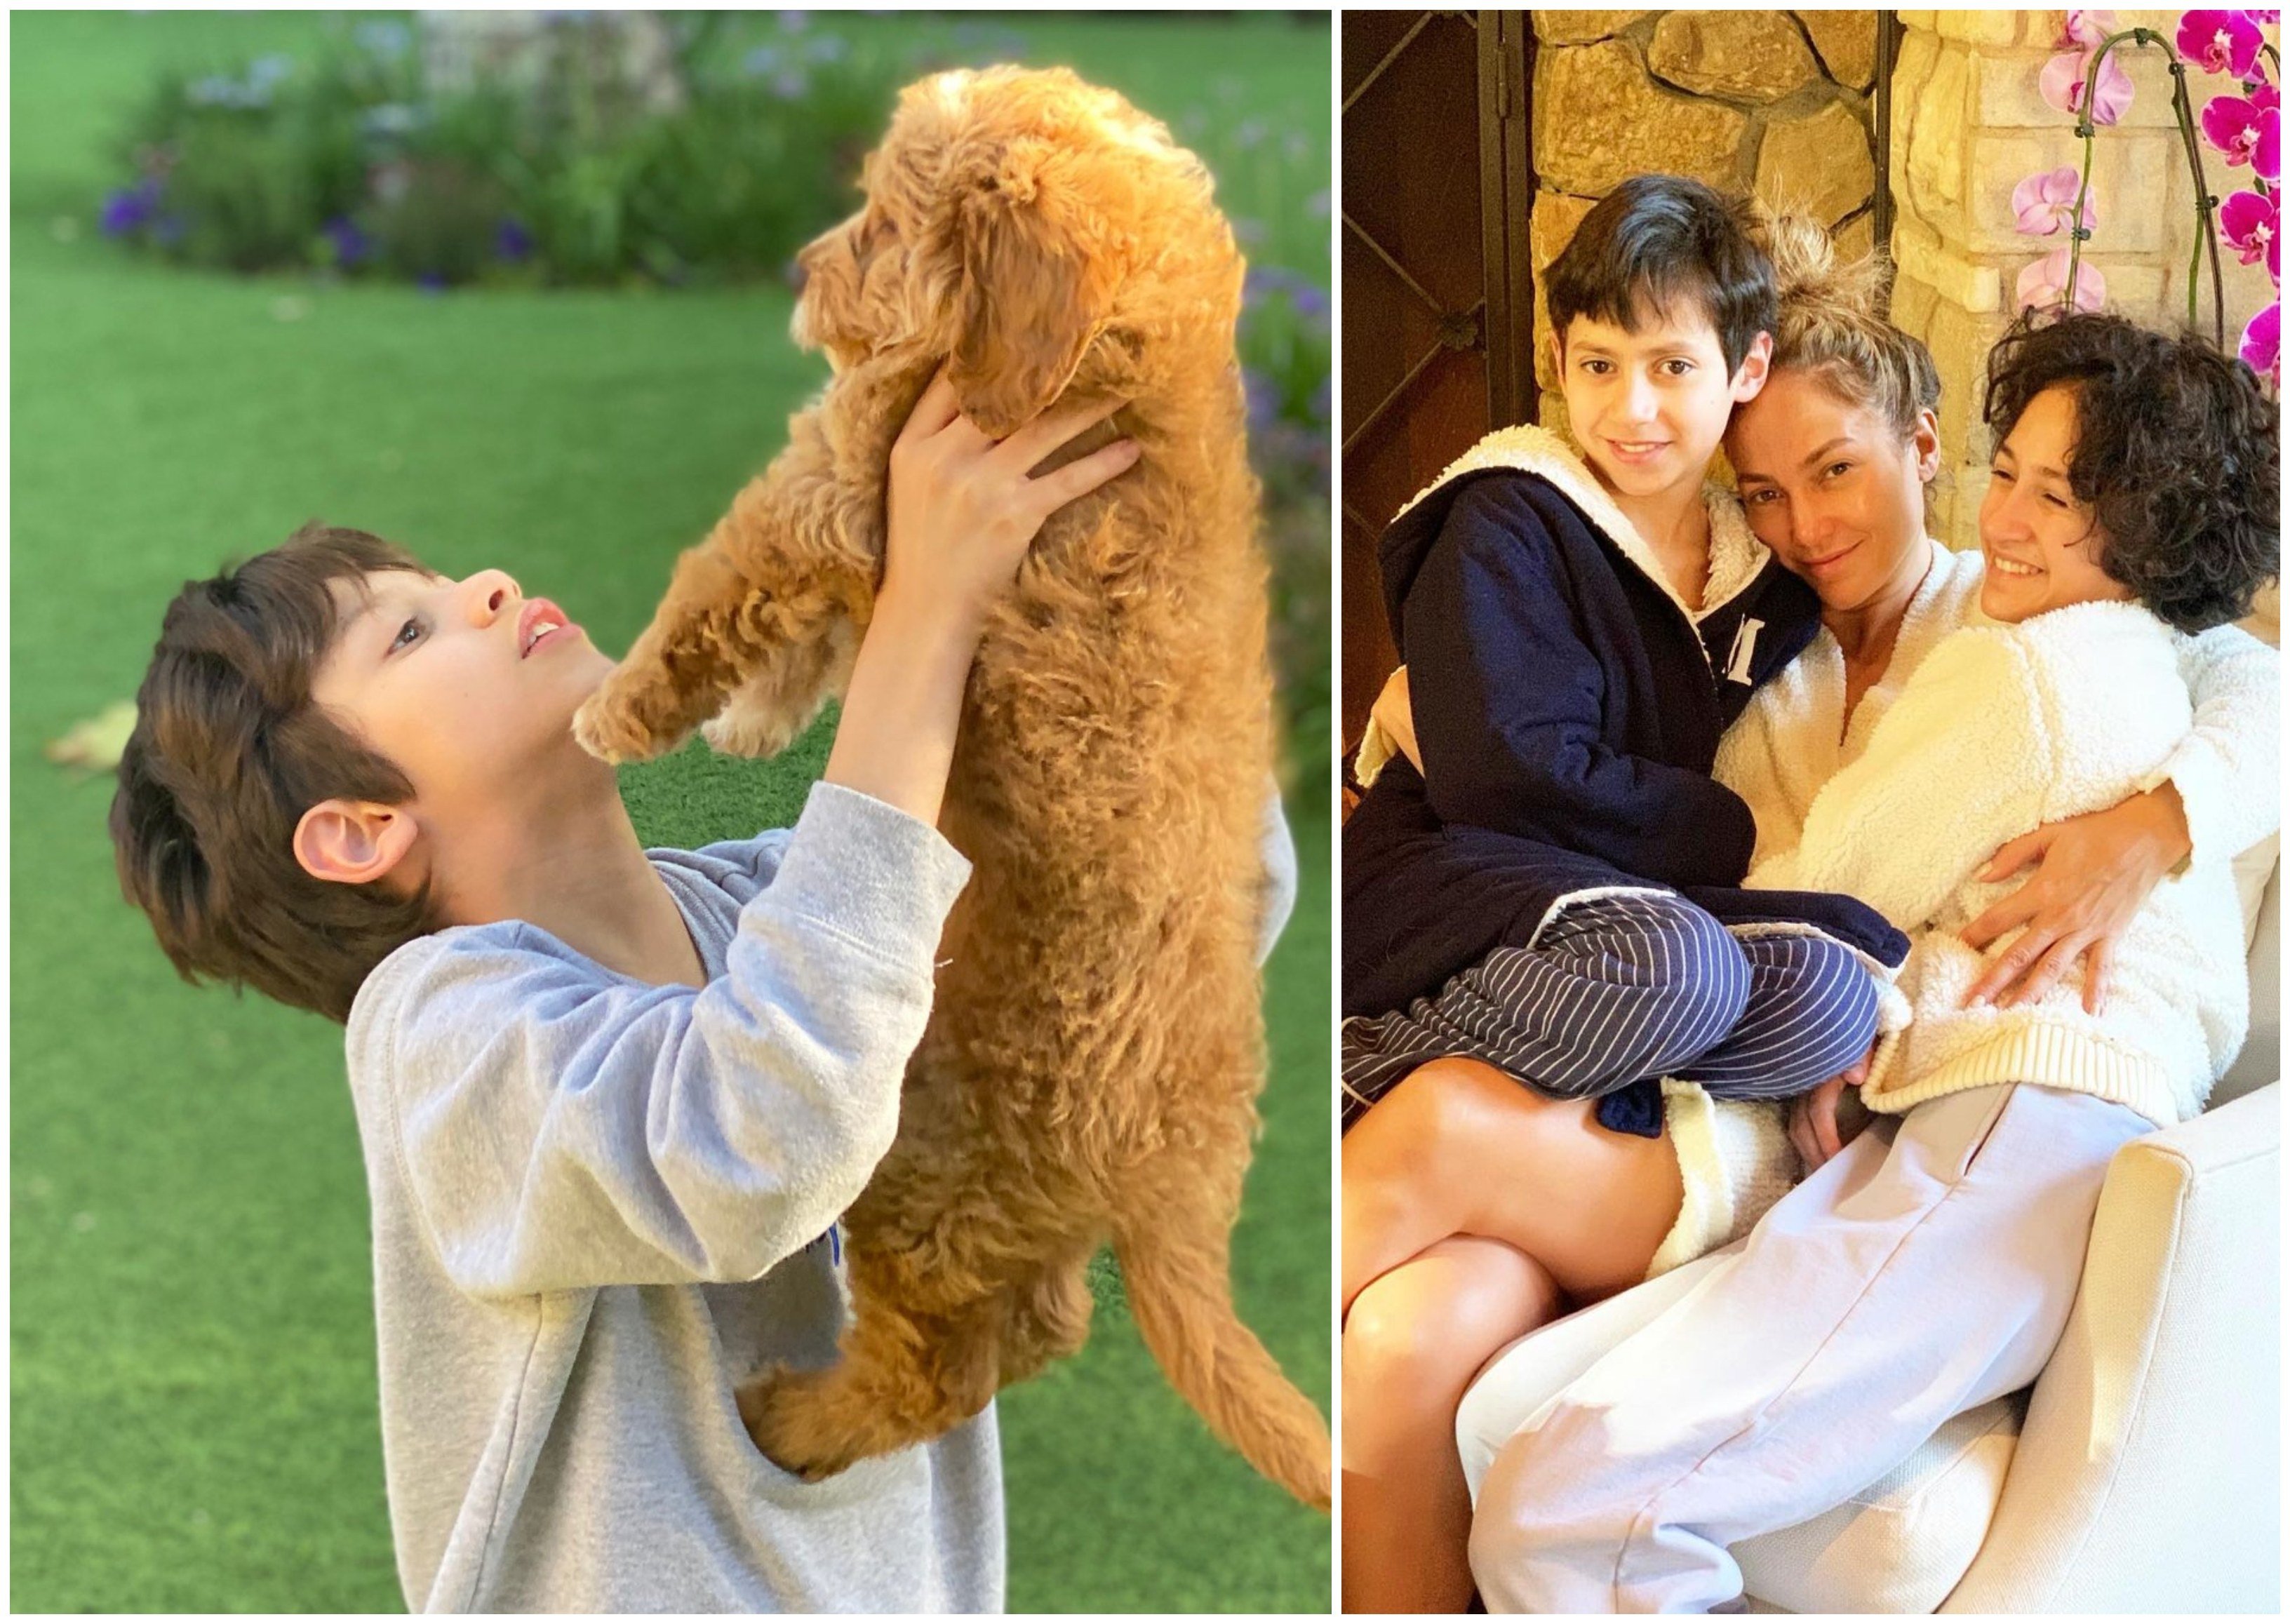 Now well and truly into his teenage years, is Maximilian David Muñiz, Jennifer Lopez’s son, starting to step into the spotlight? Photos: @Jlo/Twitter; Instagram